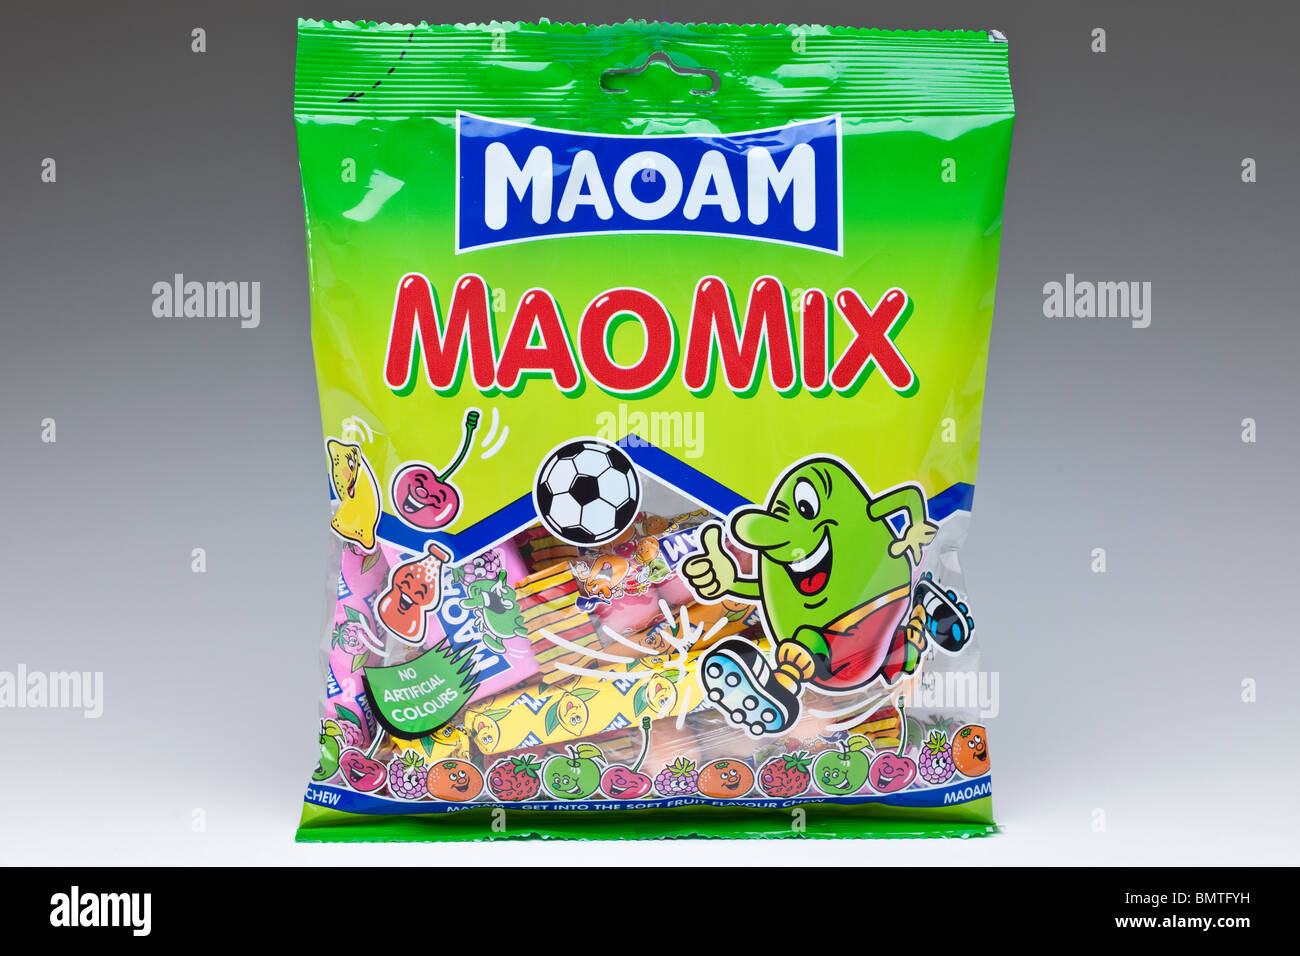 Maoam High Resolution Stock Photography and Images - Alamy